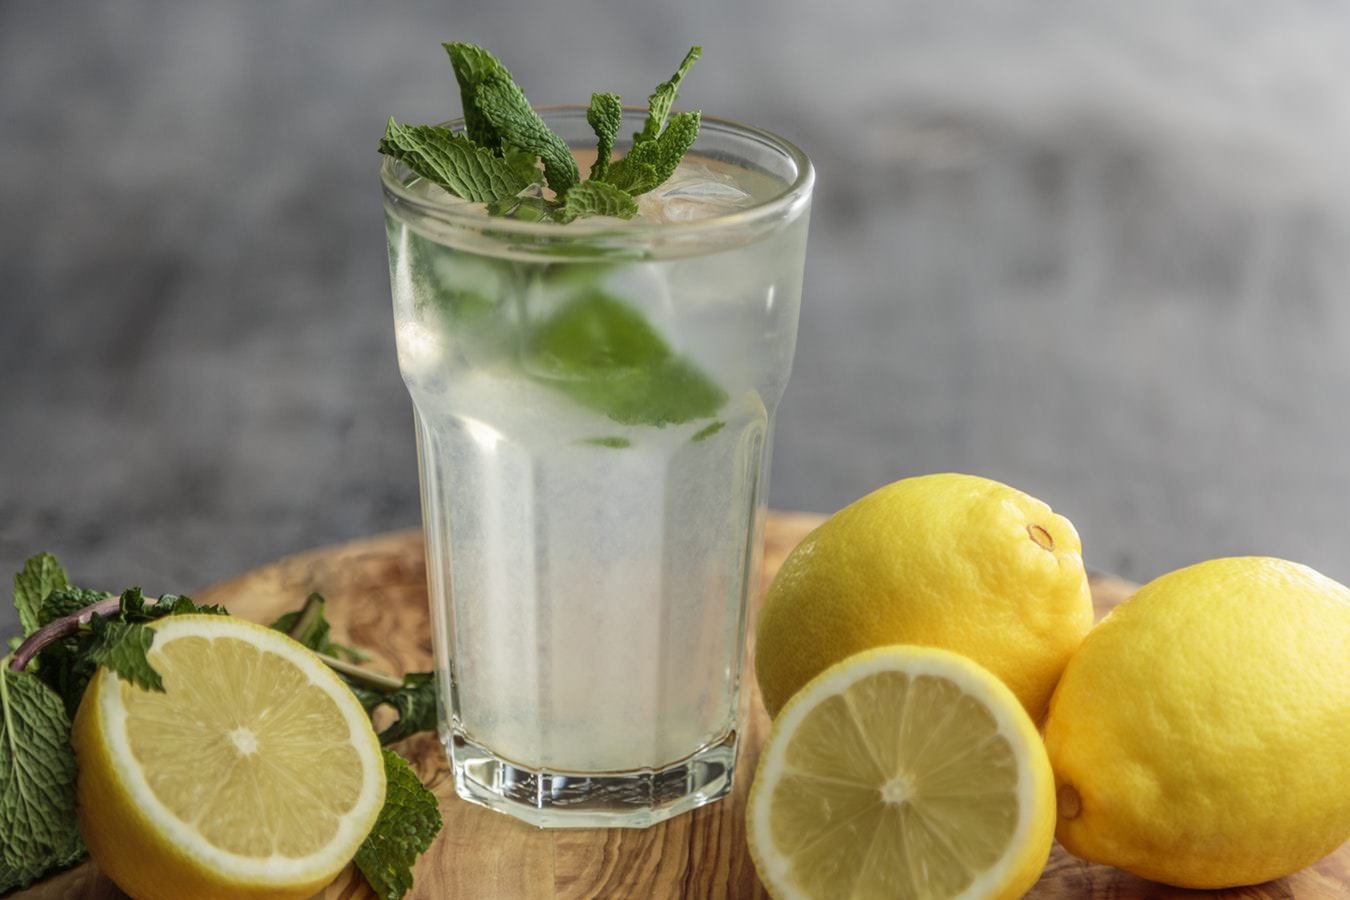 image showing an example of food and drink photography with mint and lemons